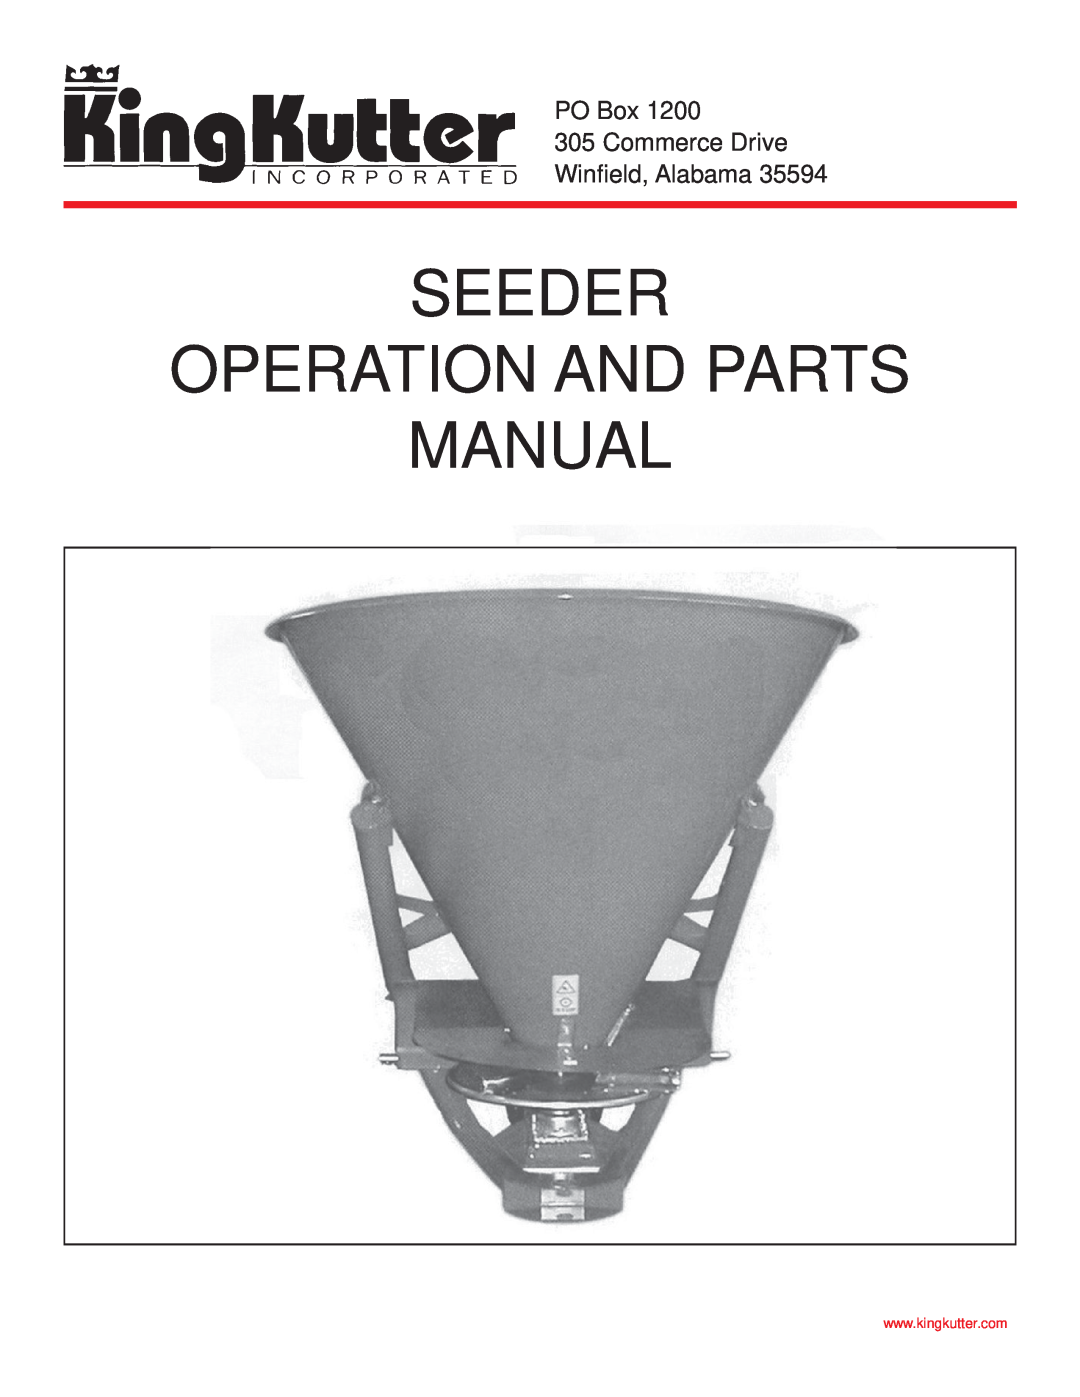 King Kutter none manual Seeder Operation And Parts Manual, PO Box 305 Commerce Drive Winfield, Alabama 